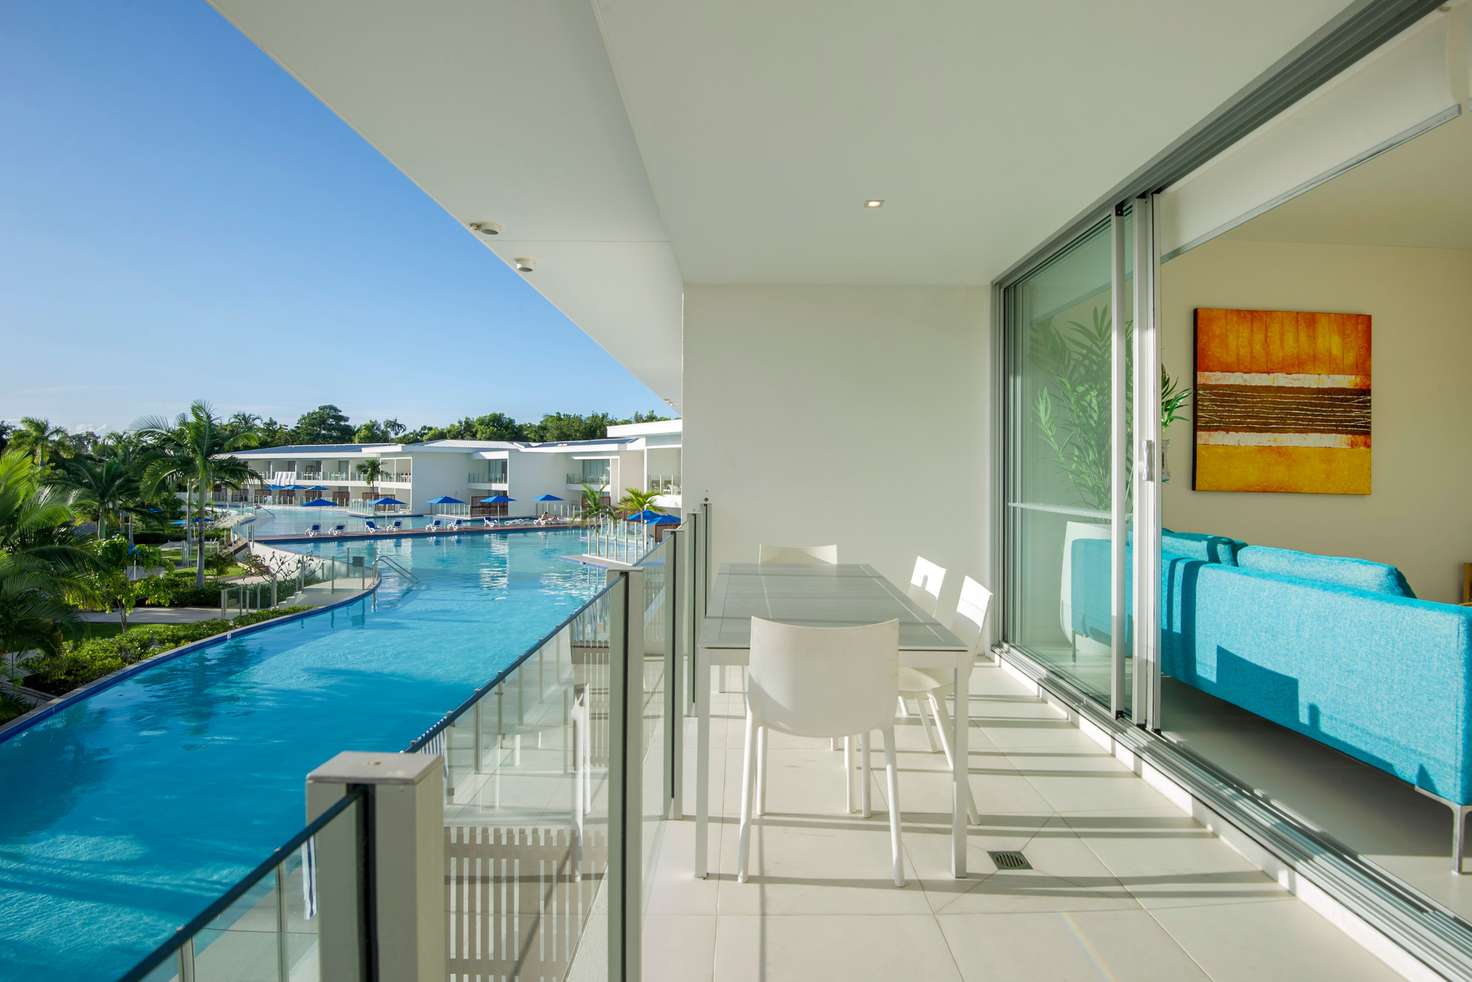 Main view of Homely apartment listing, 68/19-37 St Crispins Avenue, Port Douglas QLD 4877